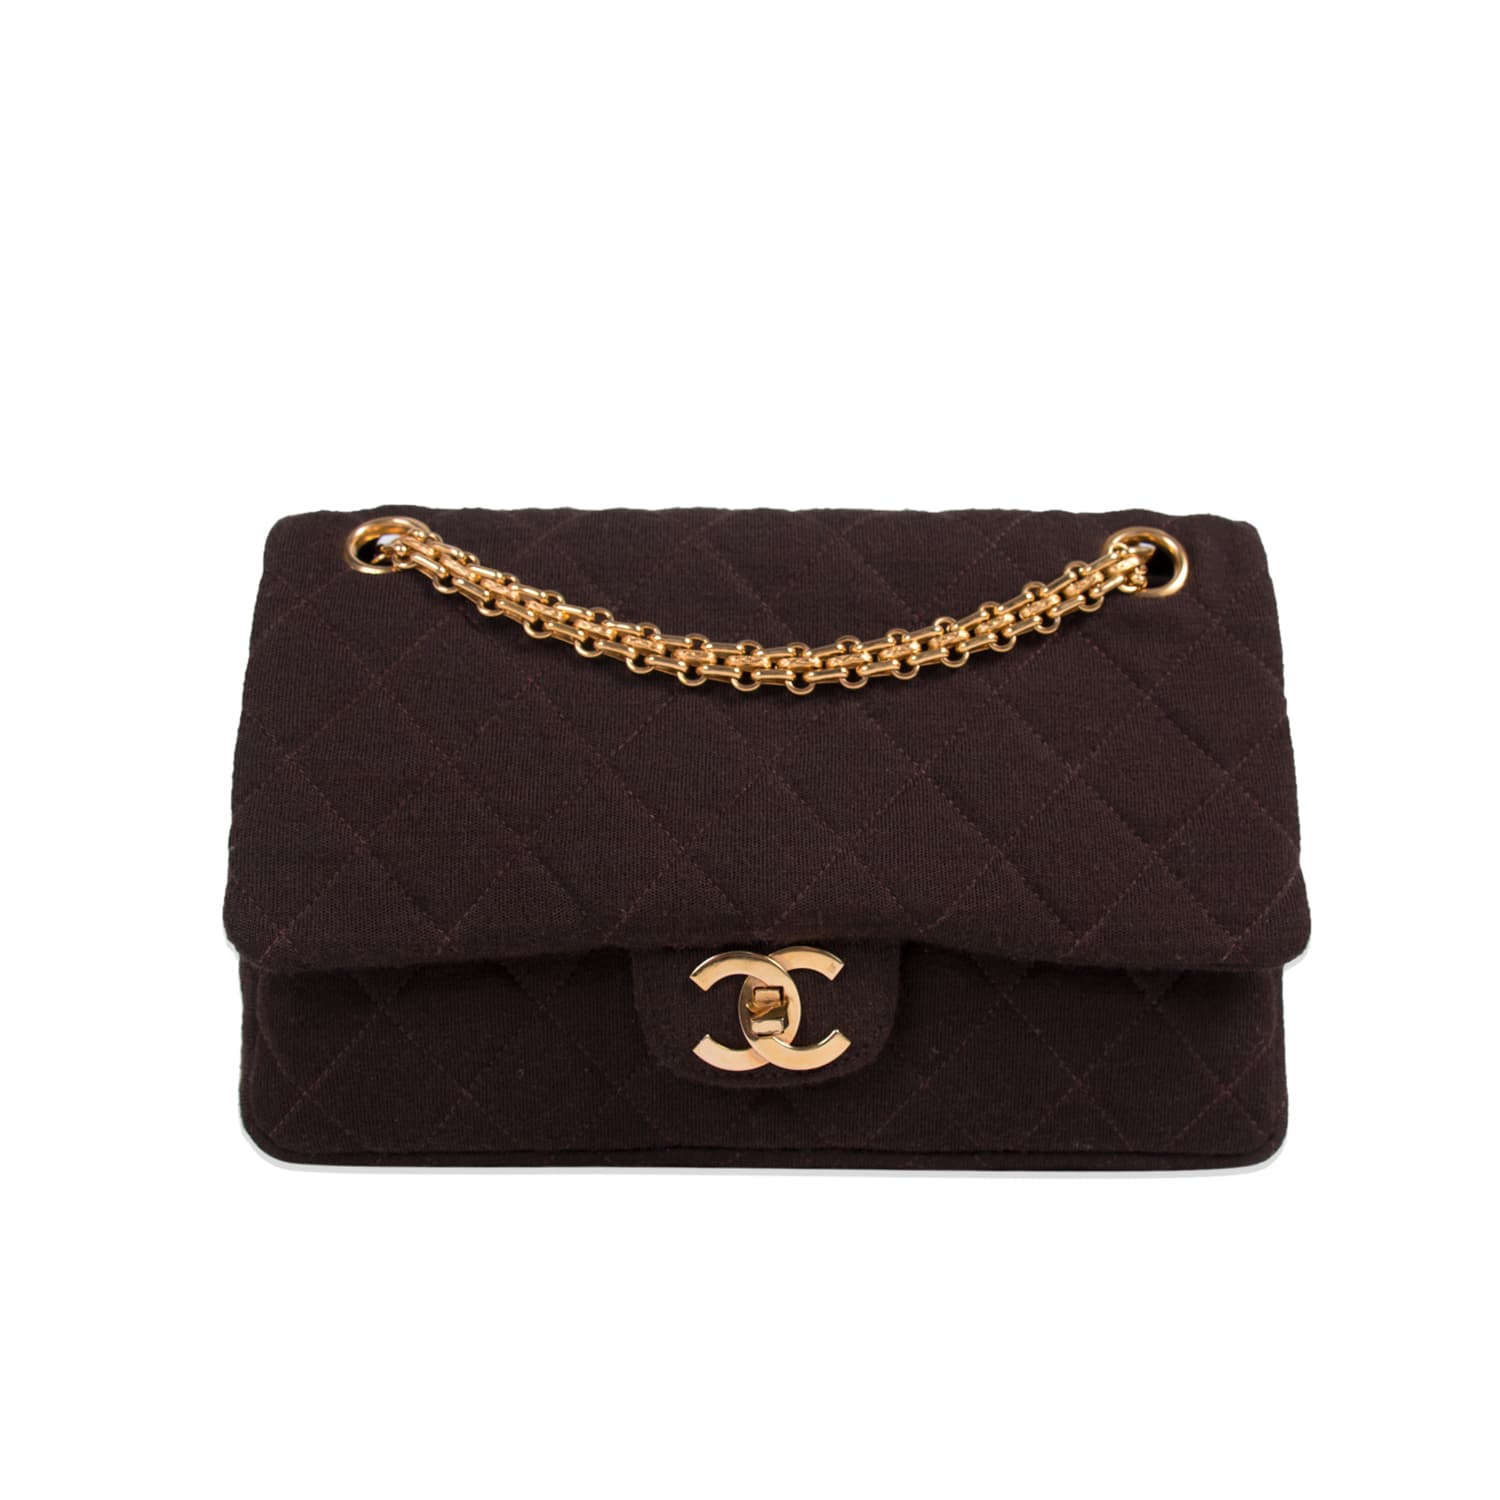 Shop authentic Chanel Vintage Classic Jersey Small Flap Bag at